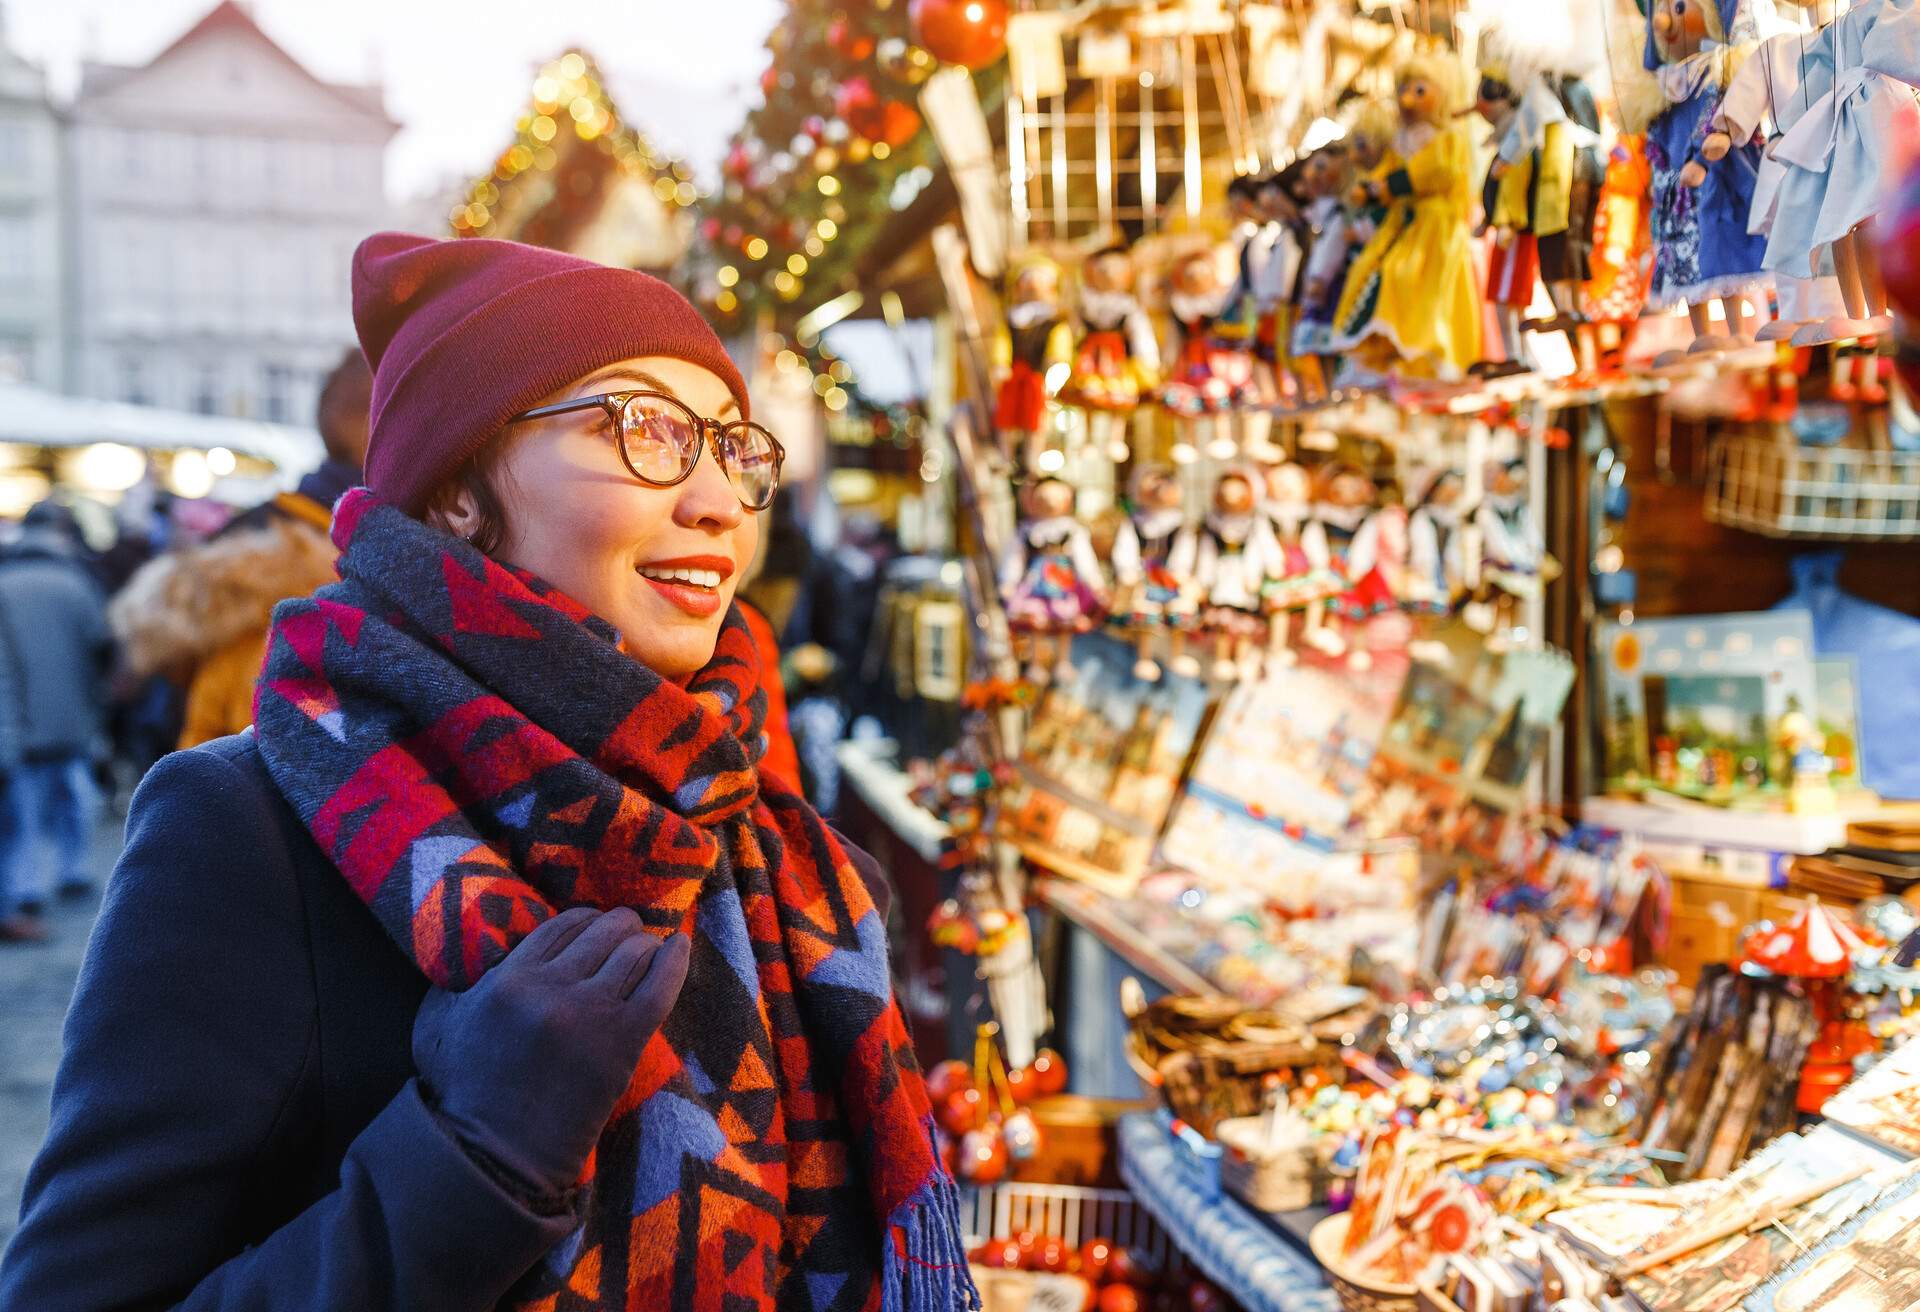 Cheerful woman in warm clothes and scarf gaze at the variety of colourful Christmas souvenirs on display.